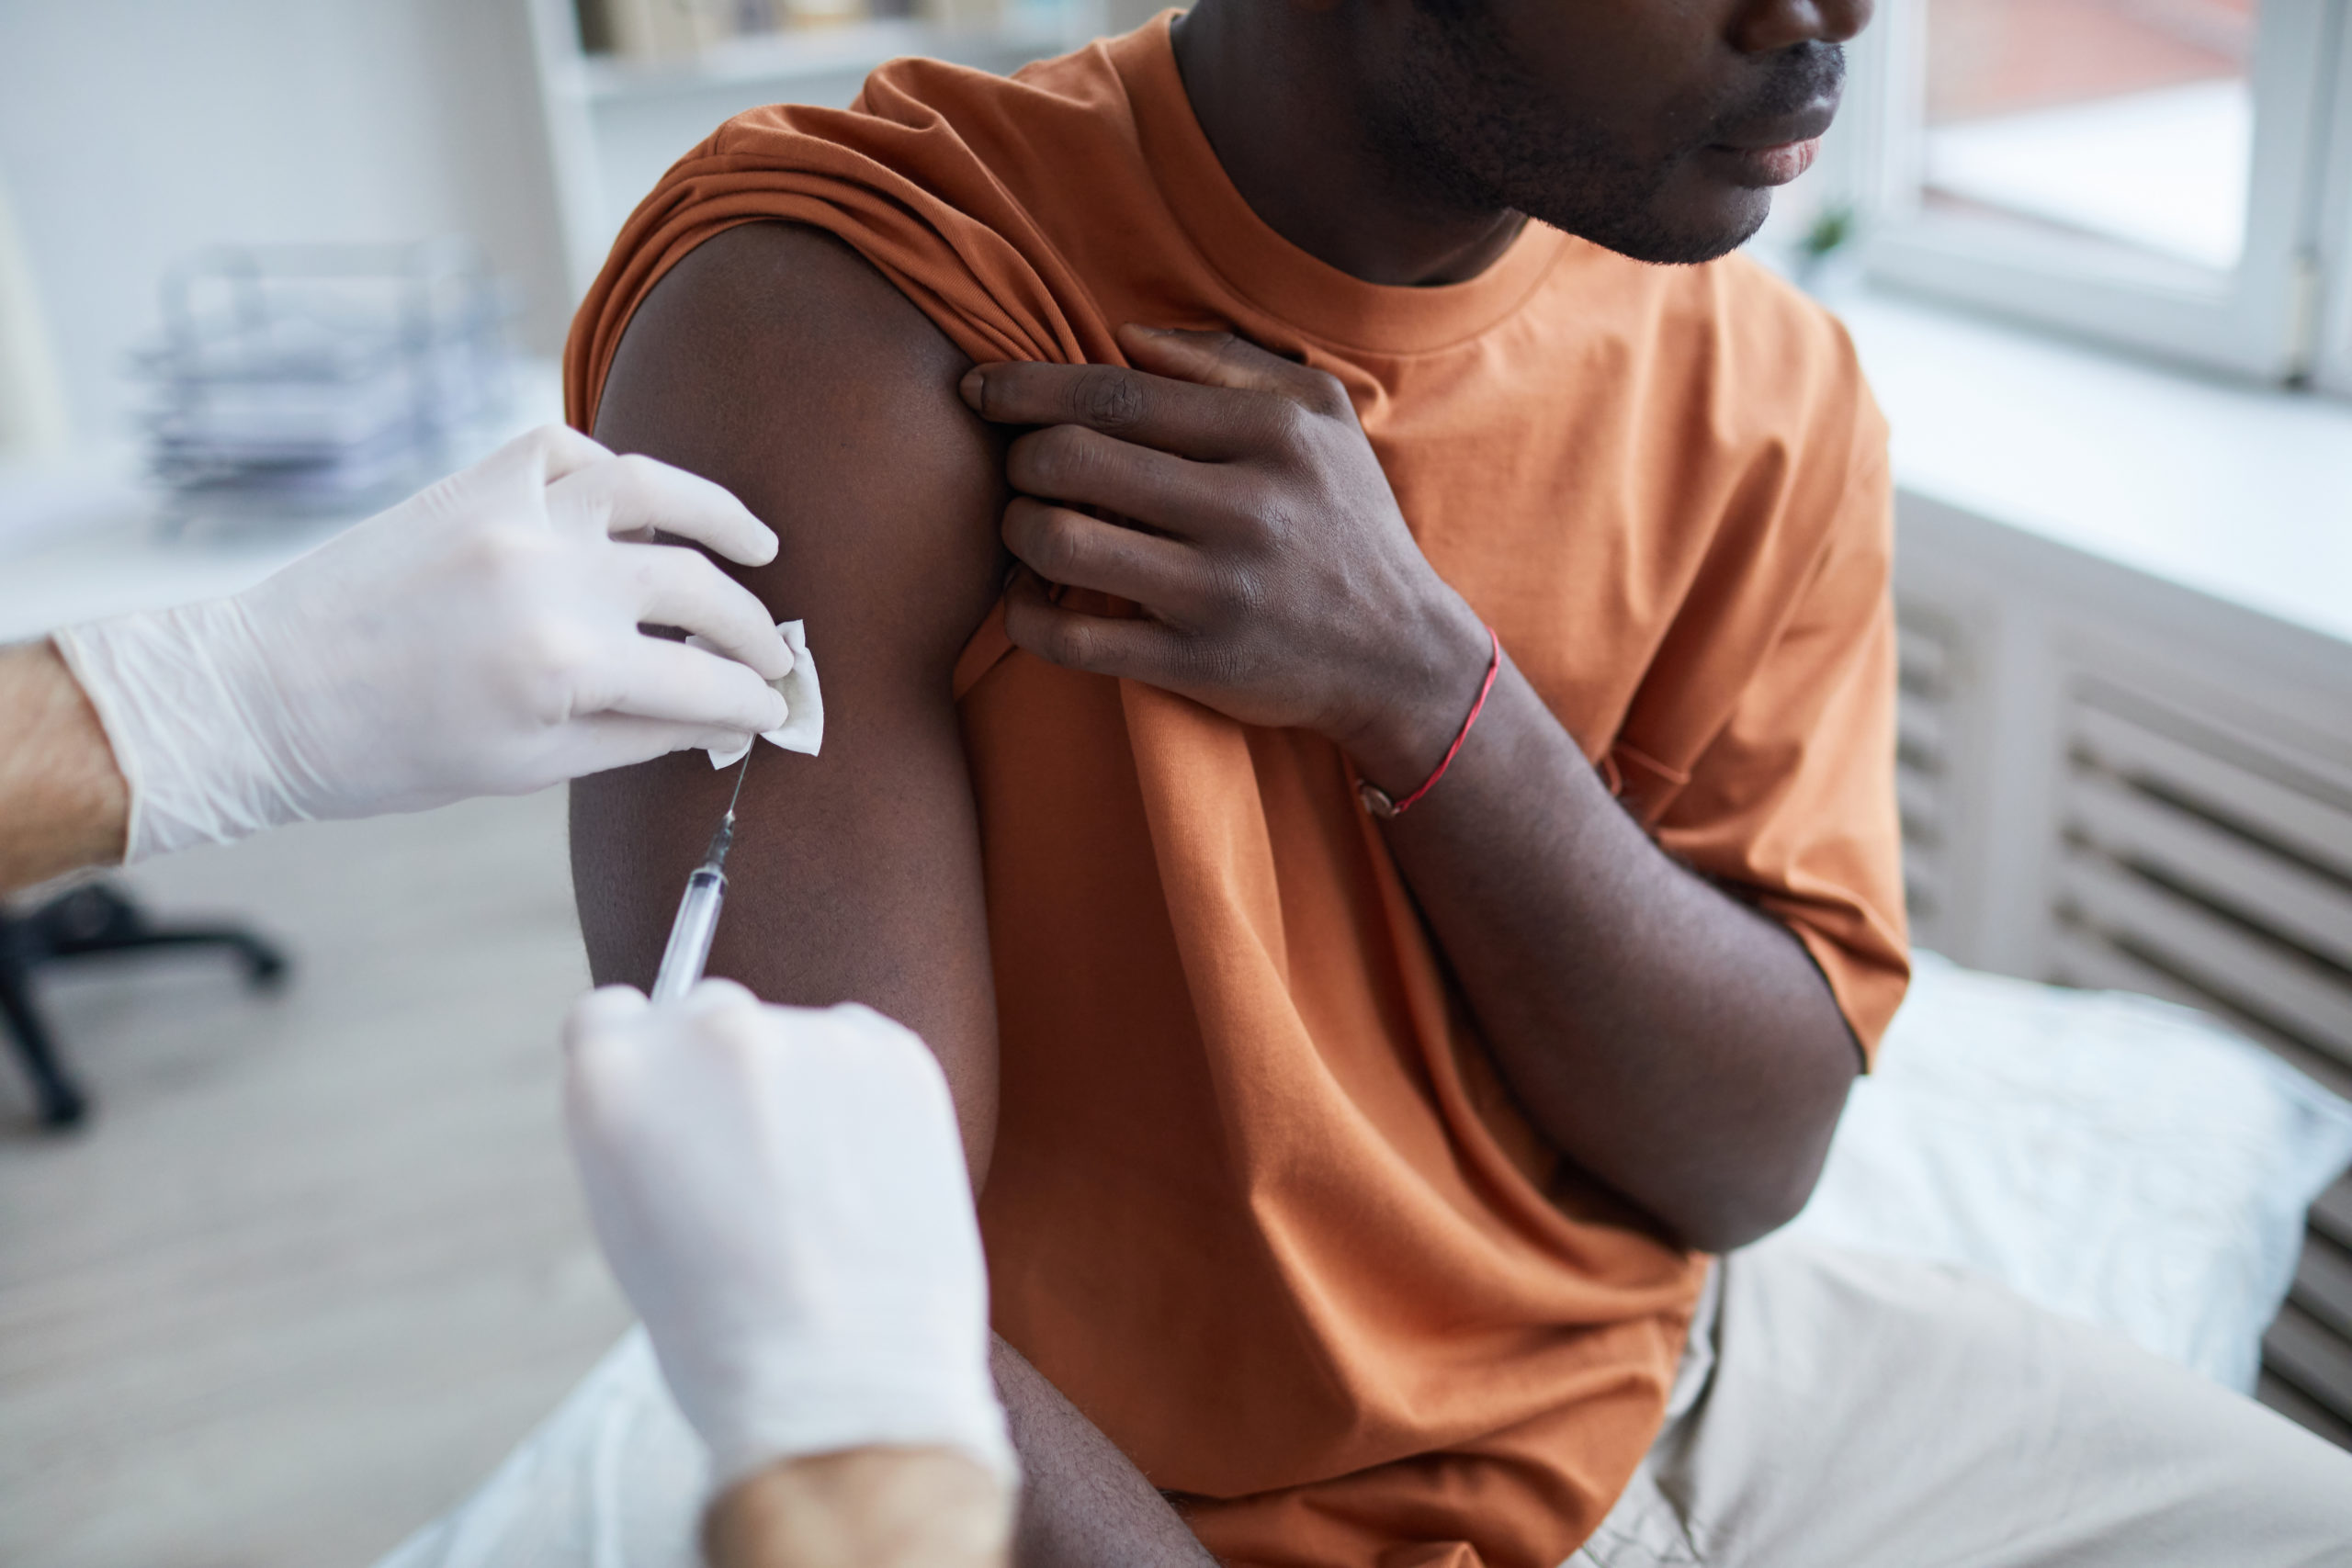 As Los Angeles increases vaccination clinics to reach more people of color, we explore why it came to this.